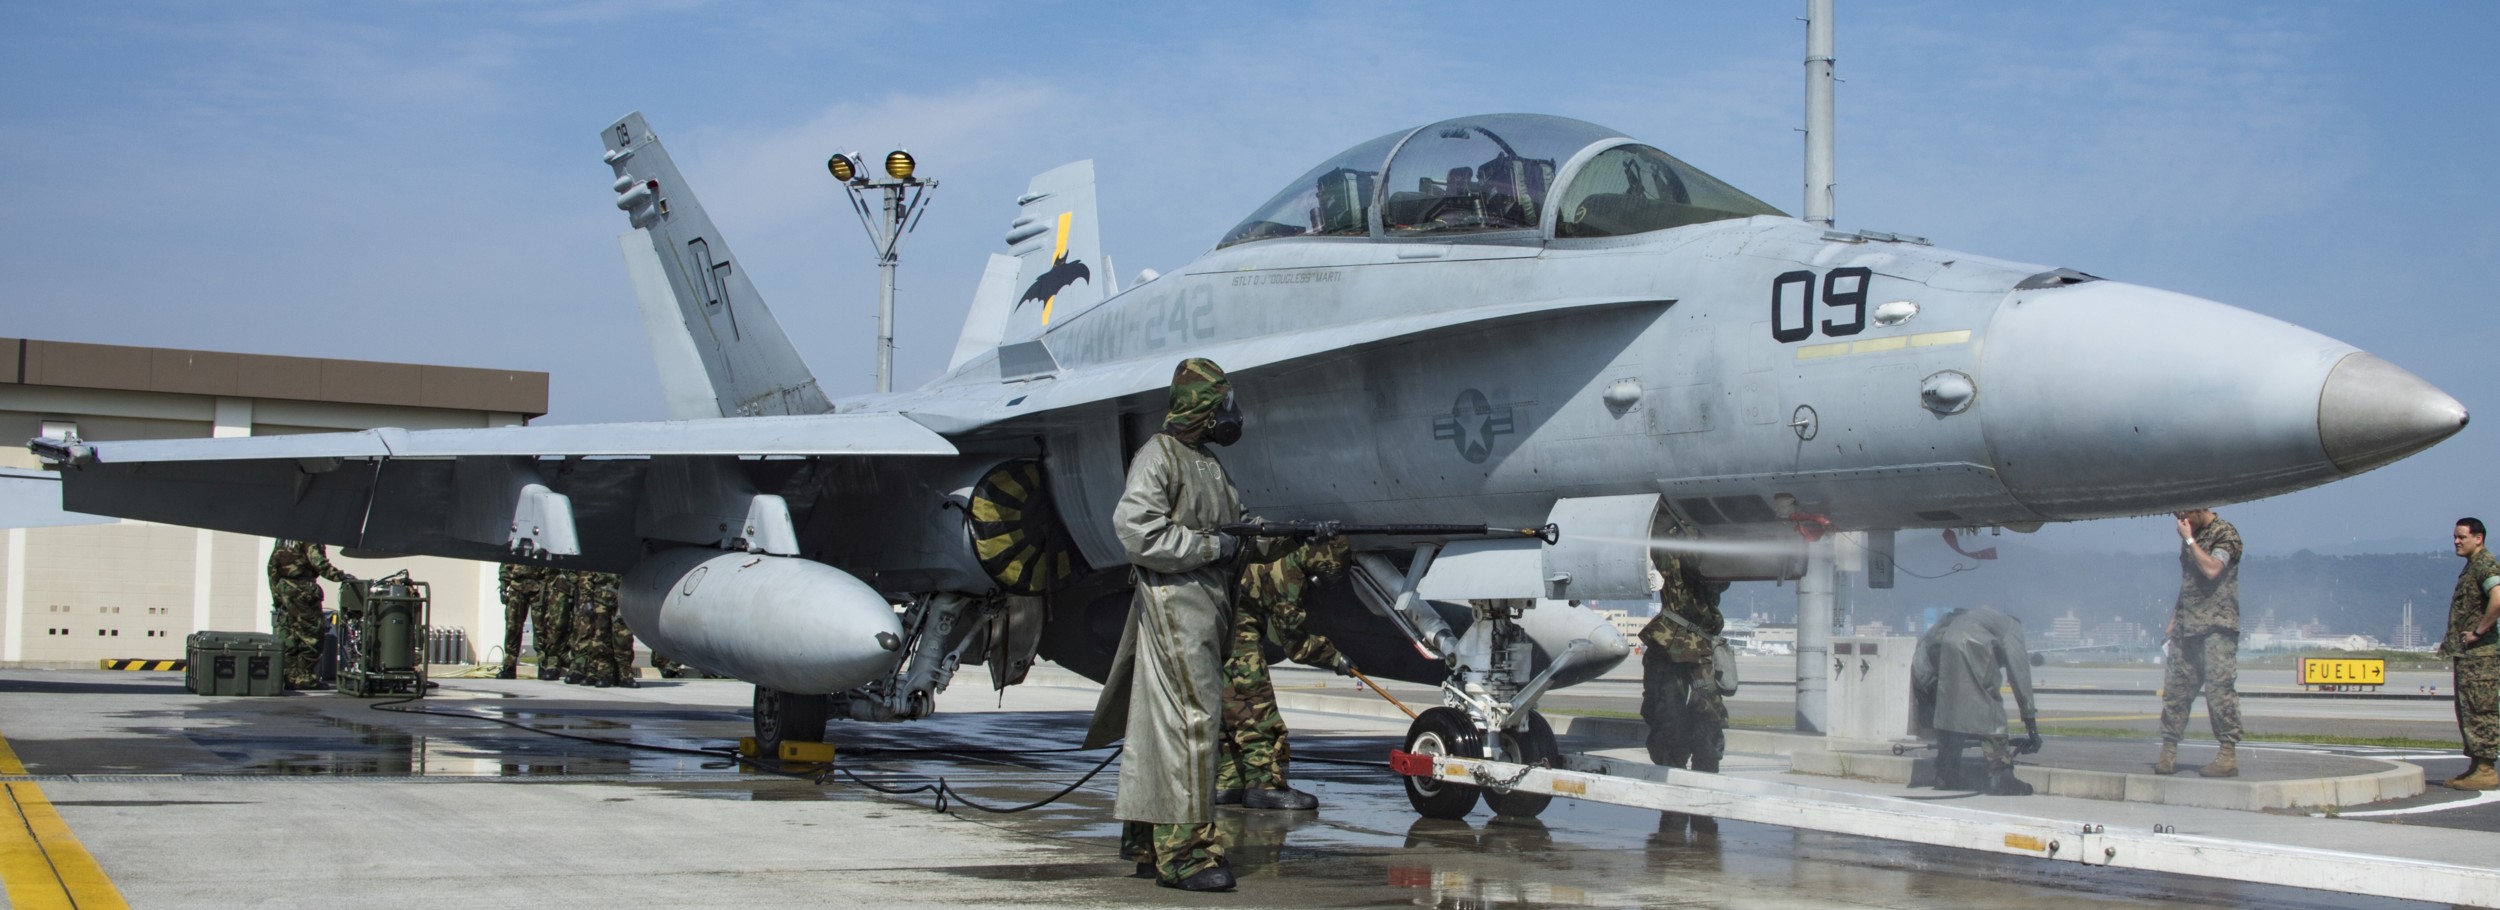 vmfa(aw)-242 bats marine all-weather fighter attack squadron usmc f/a-18d hornet 77